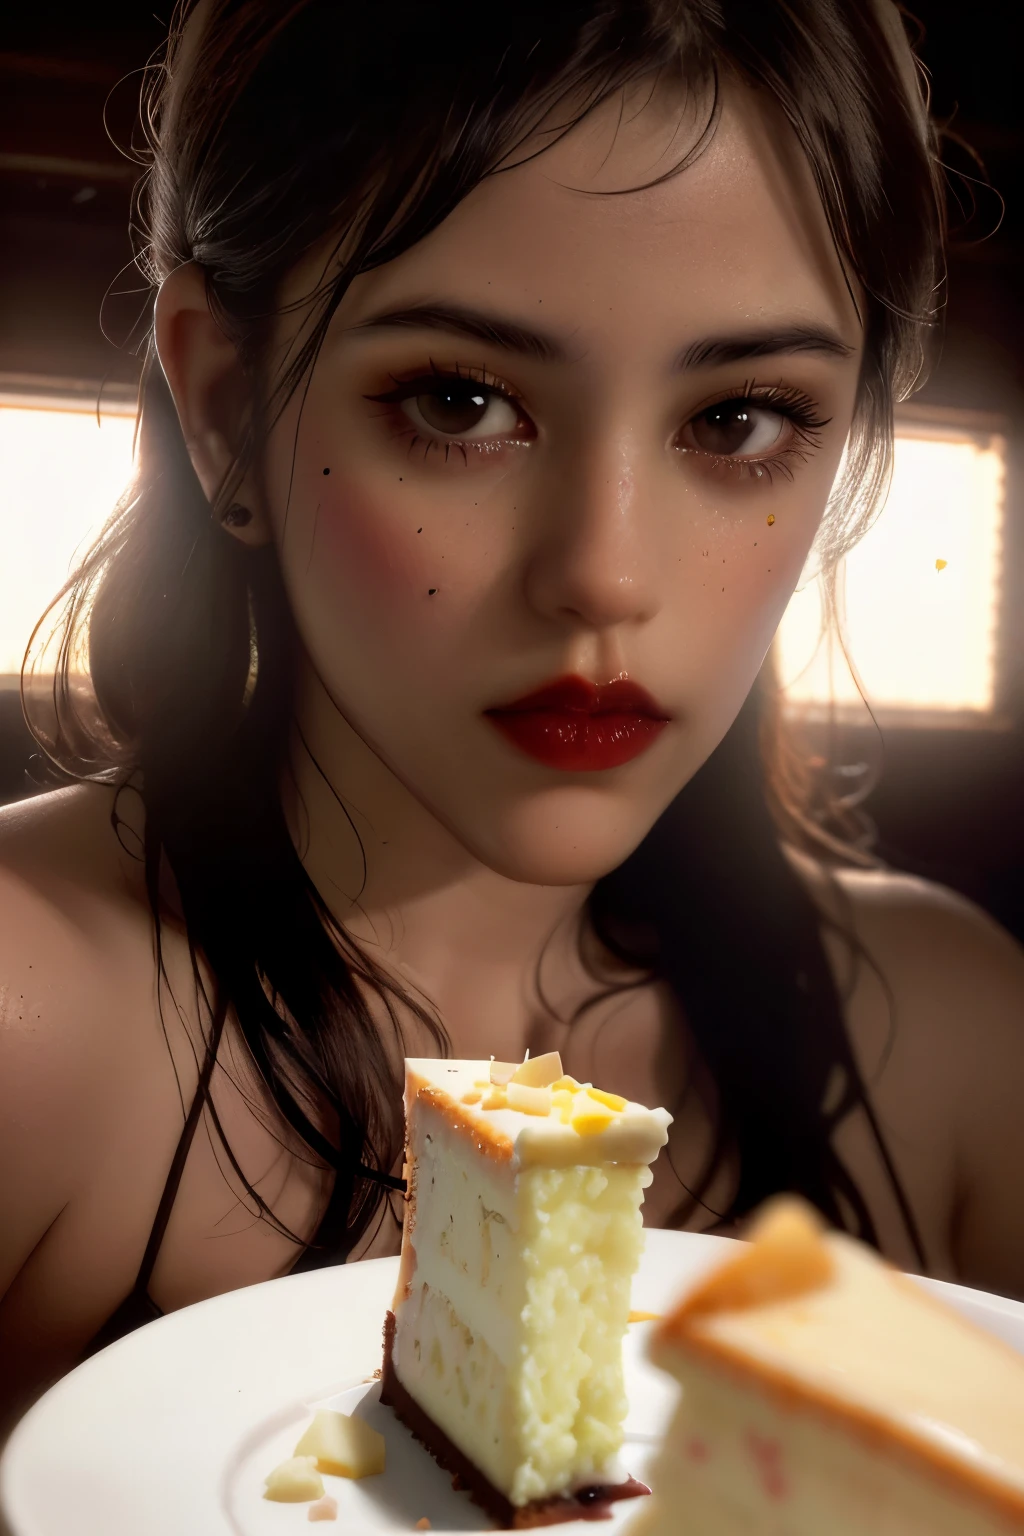 Photorealistic Appetizing slice of cherry cheesecake with chocolate, delicious, fragrant, close-up, highly detailed, intricate detail, raw photo, lifelike rendering, immersive atmosphere, chiaroscuro, moody lighting, jortega ((covered in cheese cake))